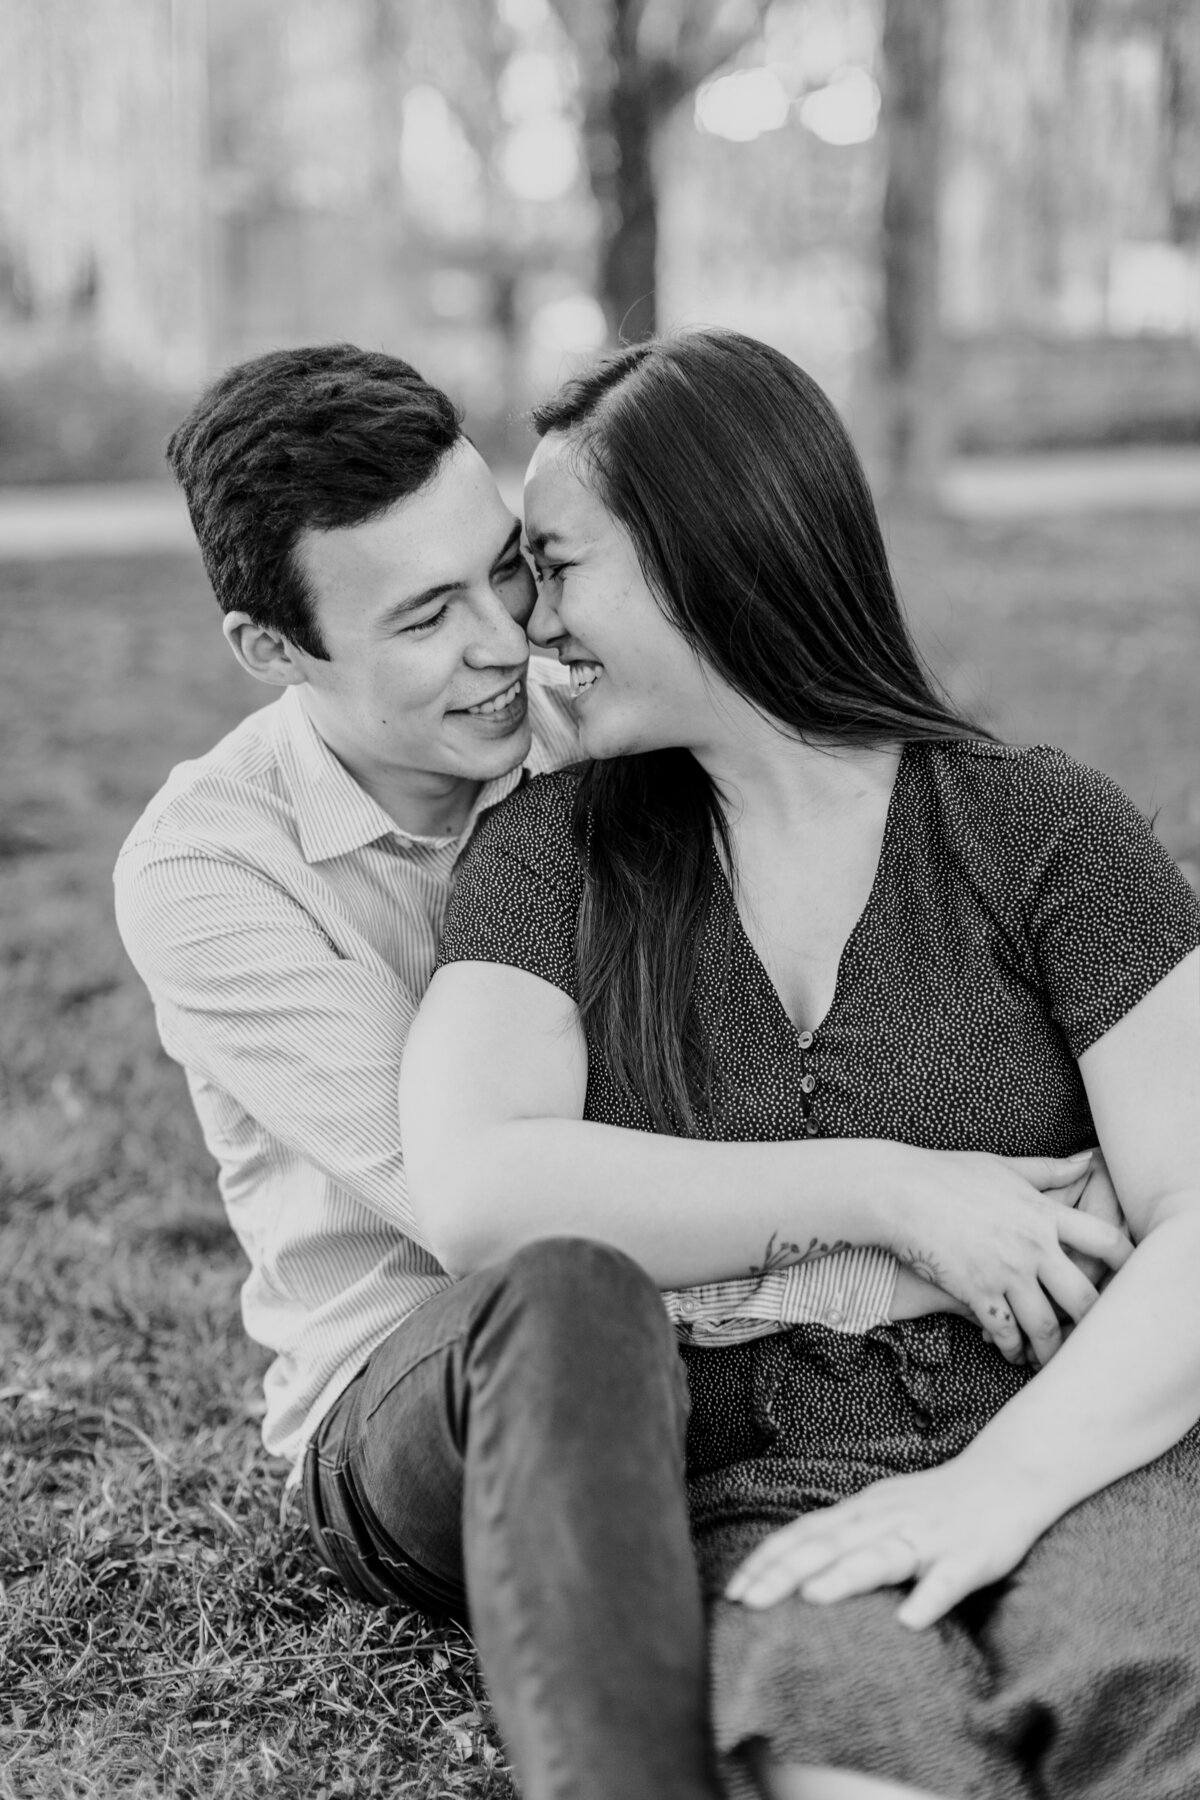 Becky_Collin_Navy_Yards_Park_The_Wharf_Washington_DC_Fall_Engagement_Session_AngelikaJohnsPhotography-7920-2